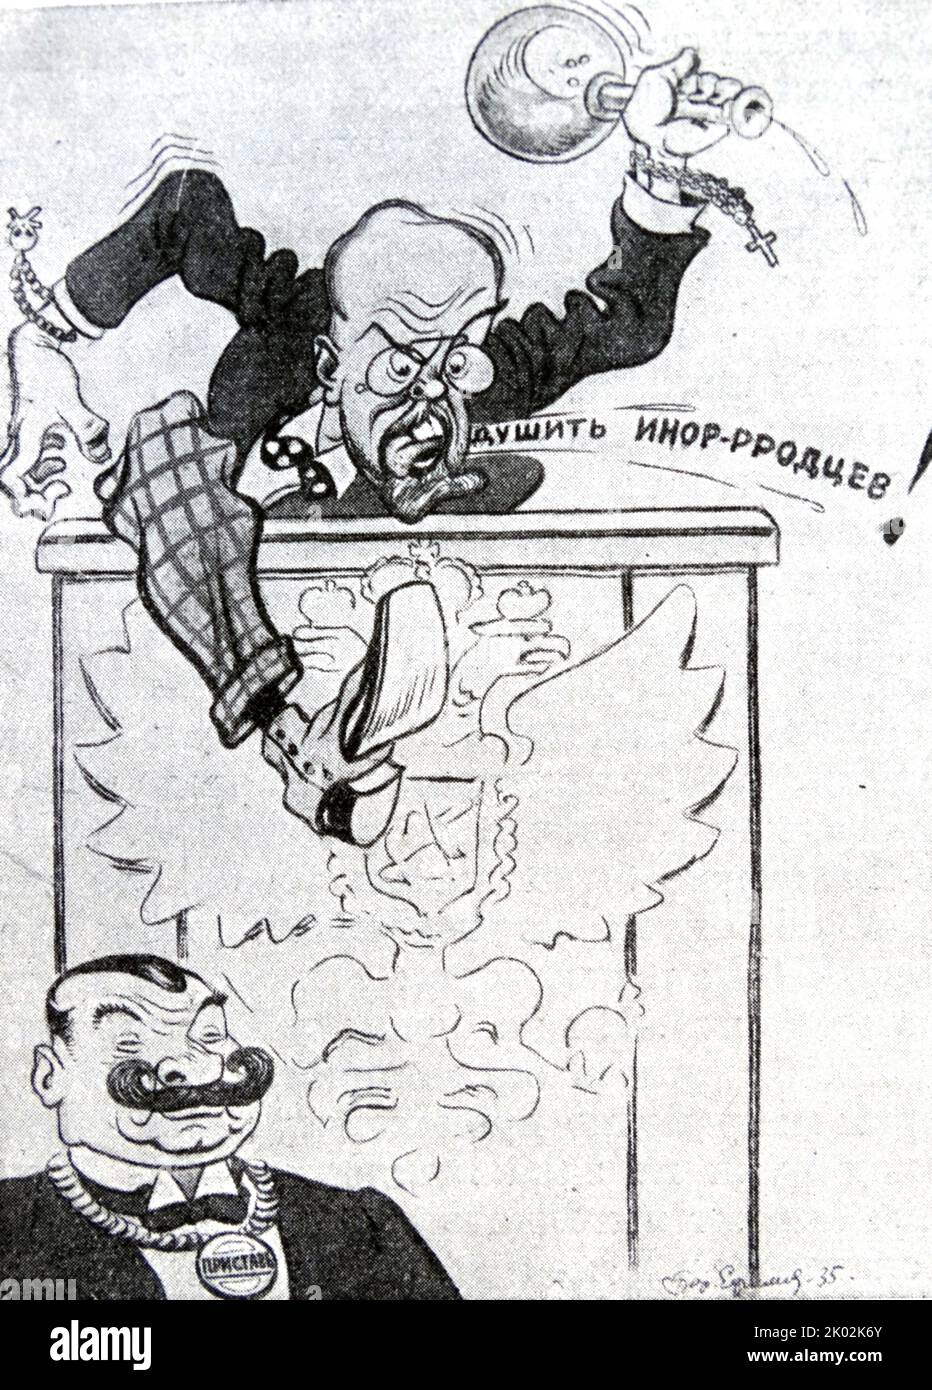 Purishkevich. Caricature of Boris Efimov. Vladimir Mitrofanovich Purishkevich (1870 - 1920) was a right-wing politician in Imperial Russia, noted for his monarchist, ultra-nationalist, antisemitic and anti-Communist views. At the end of 1916, he participated in the killing of Grigori Rasputin. Stock Photo